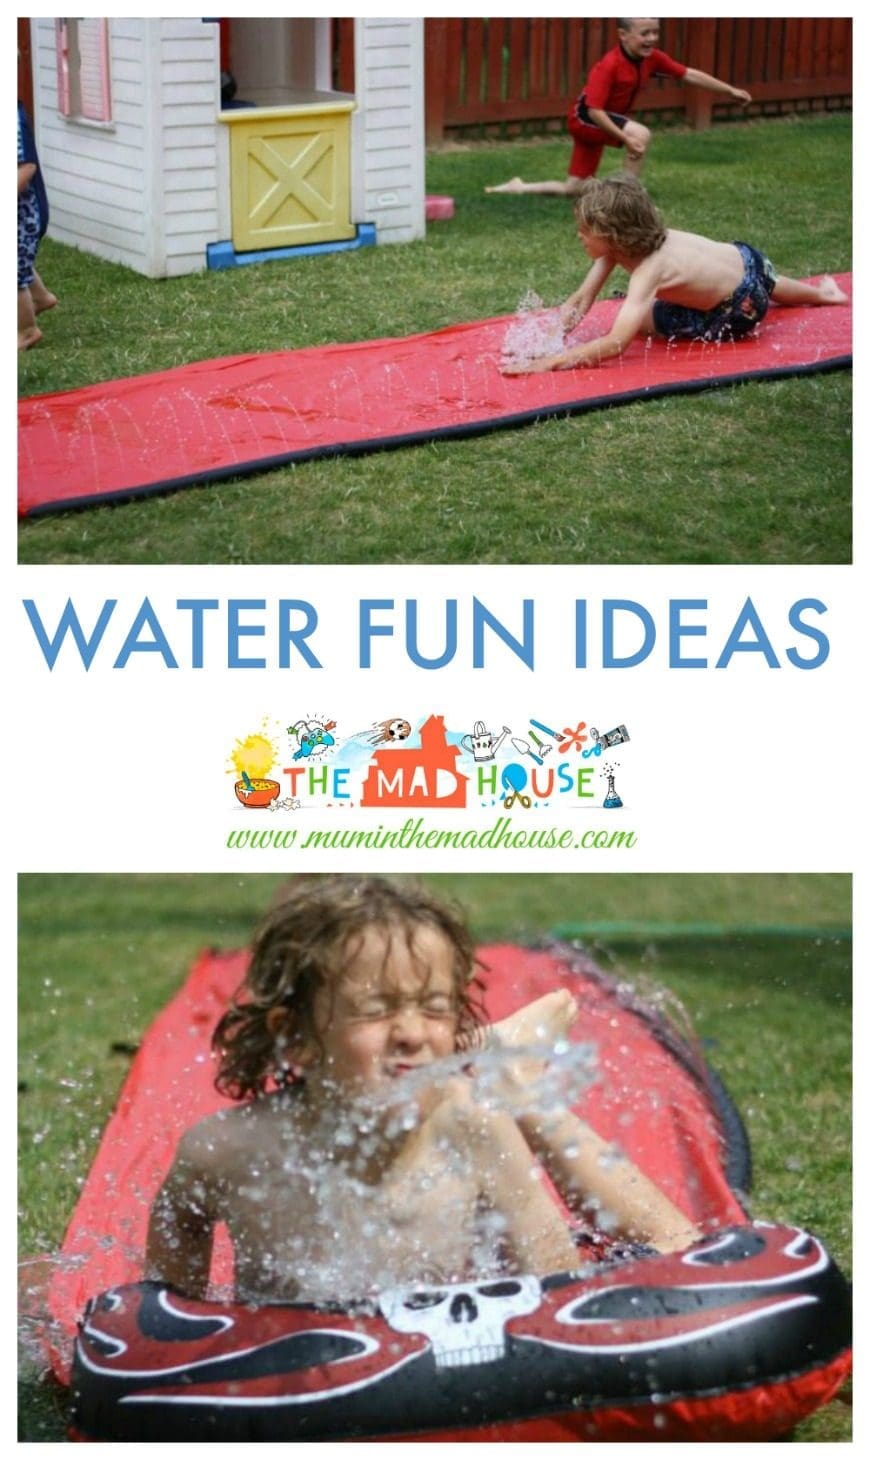 One of the best things about summer is water play and summer is the perfect time to have some water fun as a family. The summer is all about making memories.